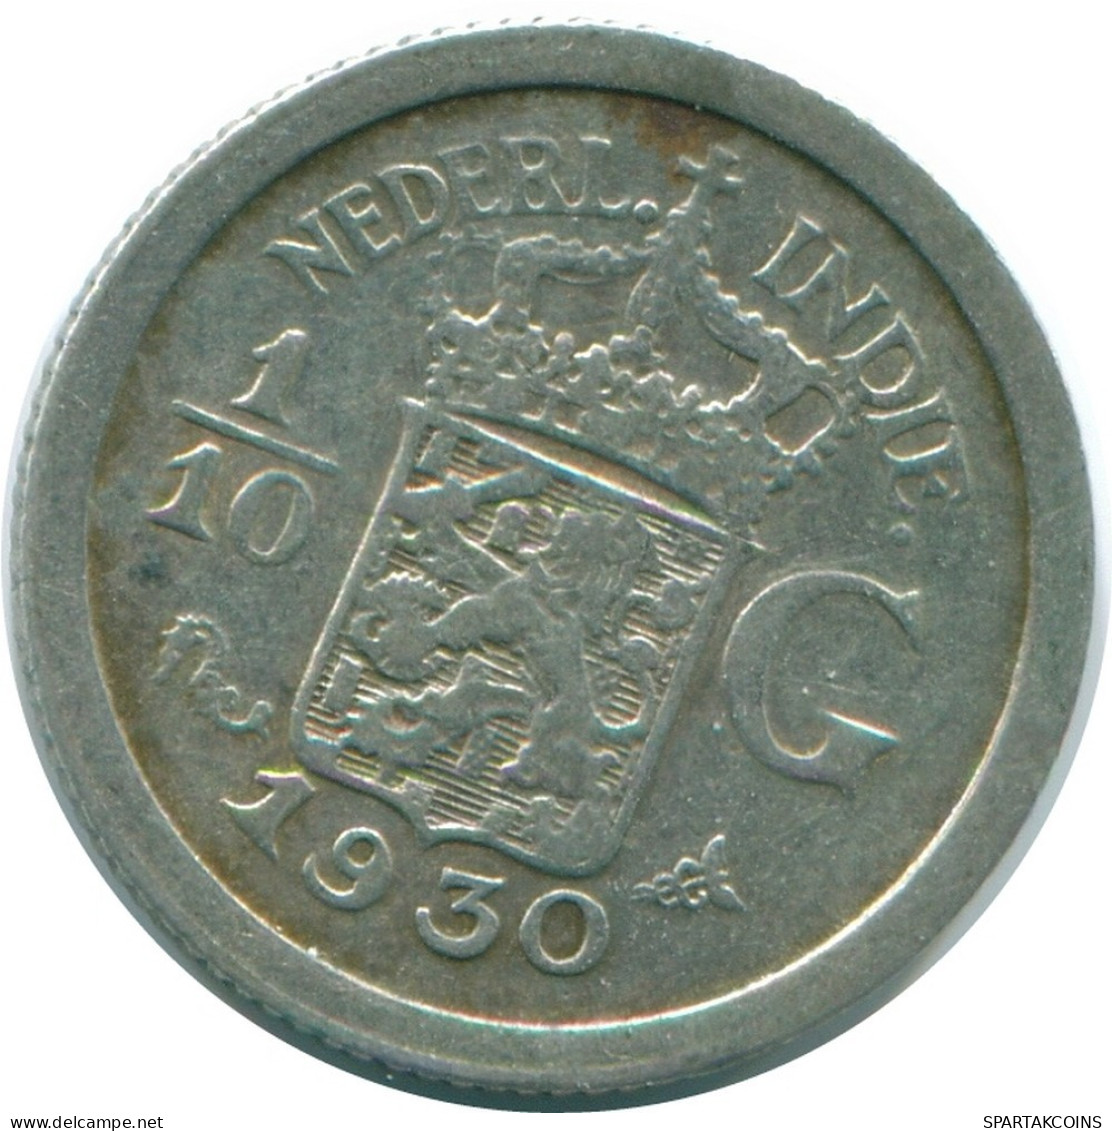 1/10 GULDEN 1930 NETHERLANDS EAST INDIES SILVER Colonial Coin #NL13446.3.U.A - Dutch East Indies